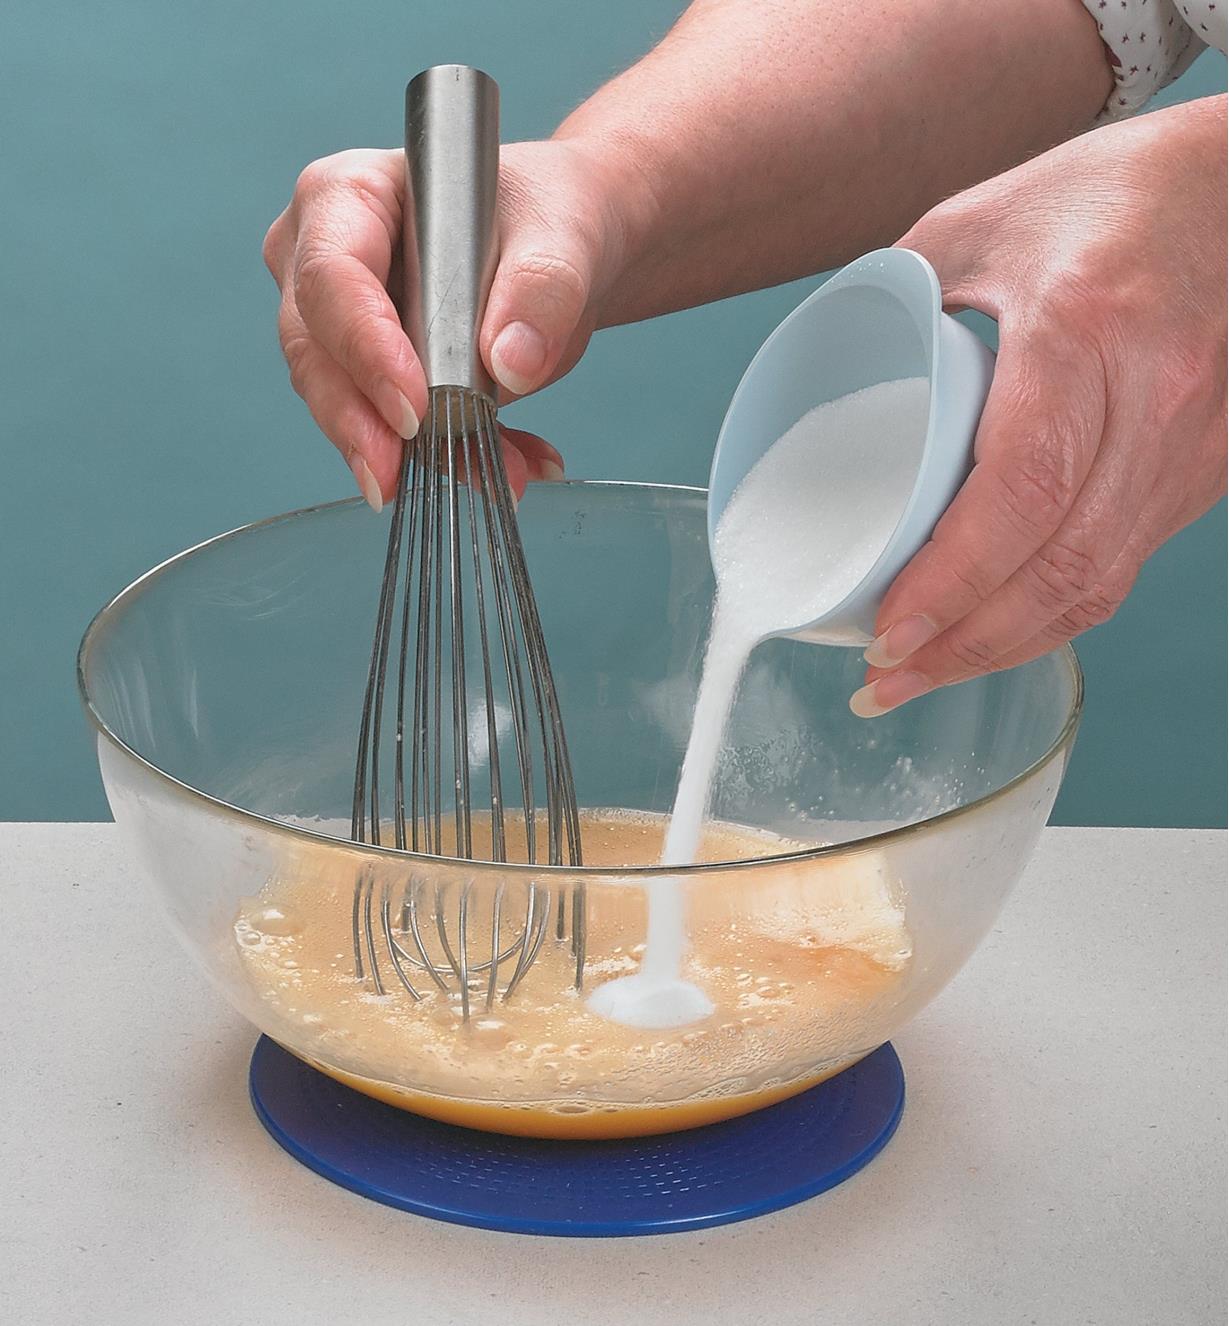 No-Slip Pad placed under a mixing bowl to prevent it from sliding while ingredients are added